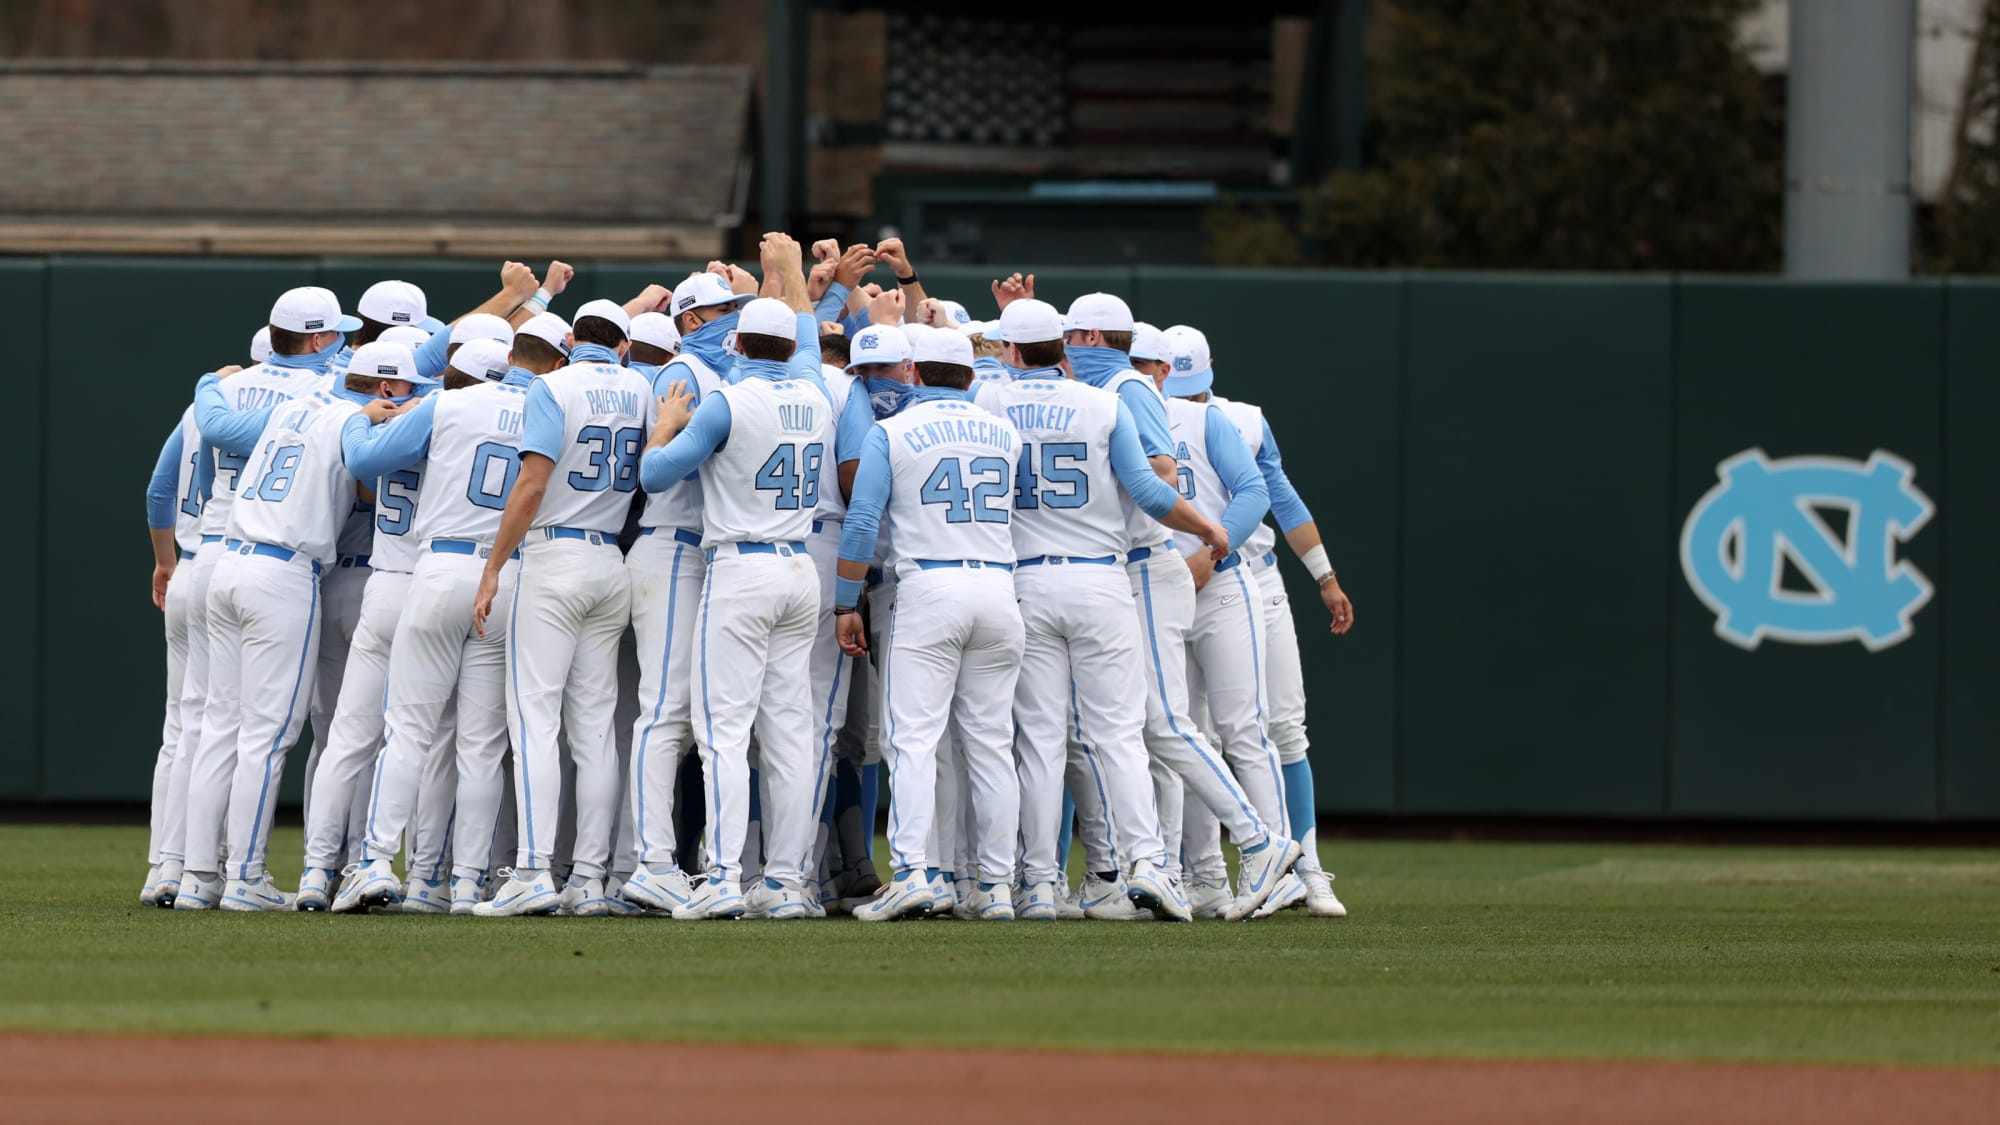 Former UNC Baseball standout Joey Lancellotti signs with New York Mets organization